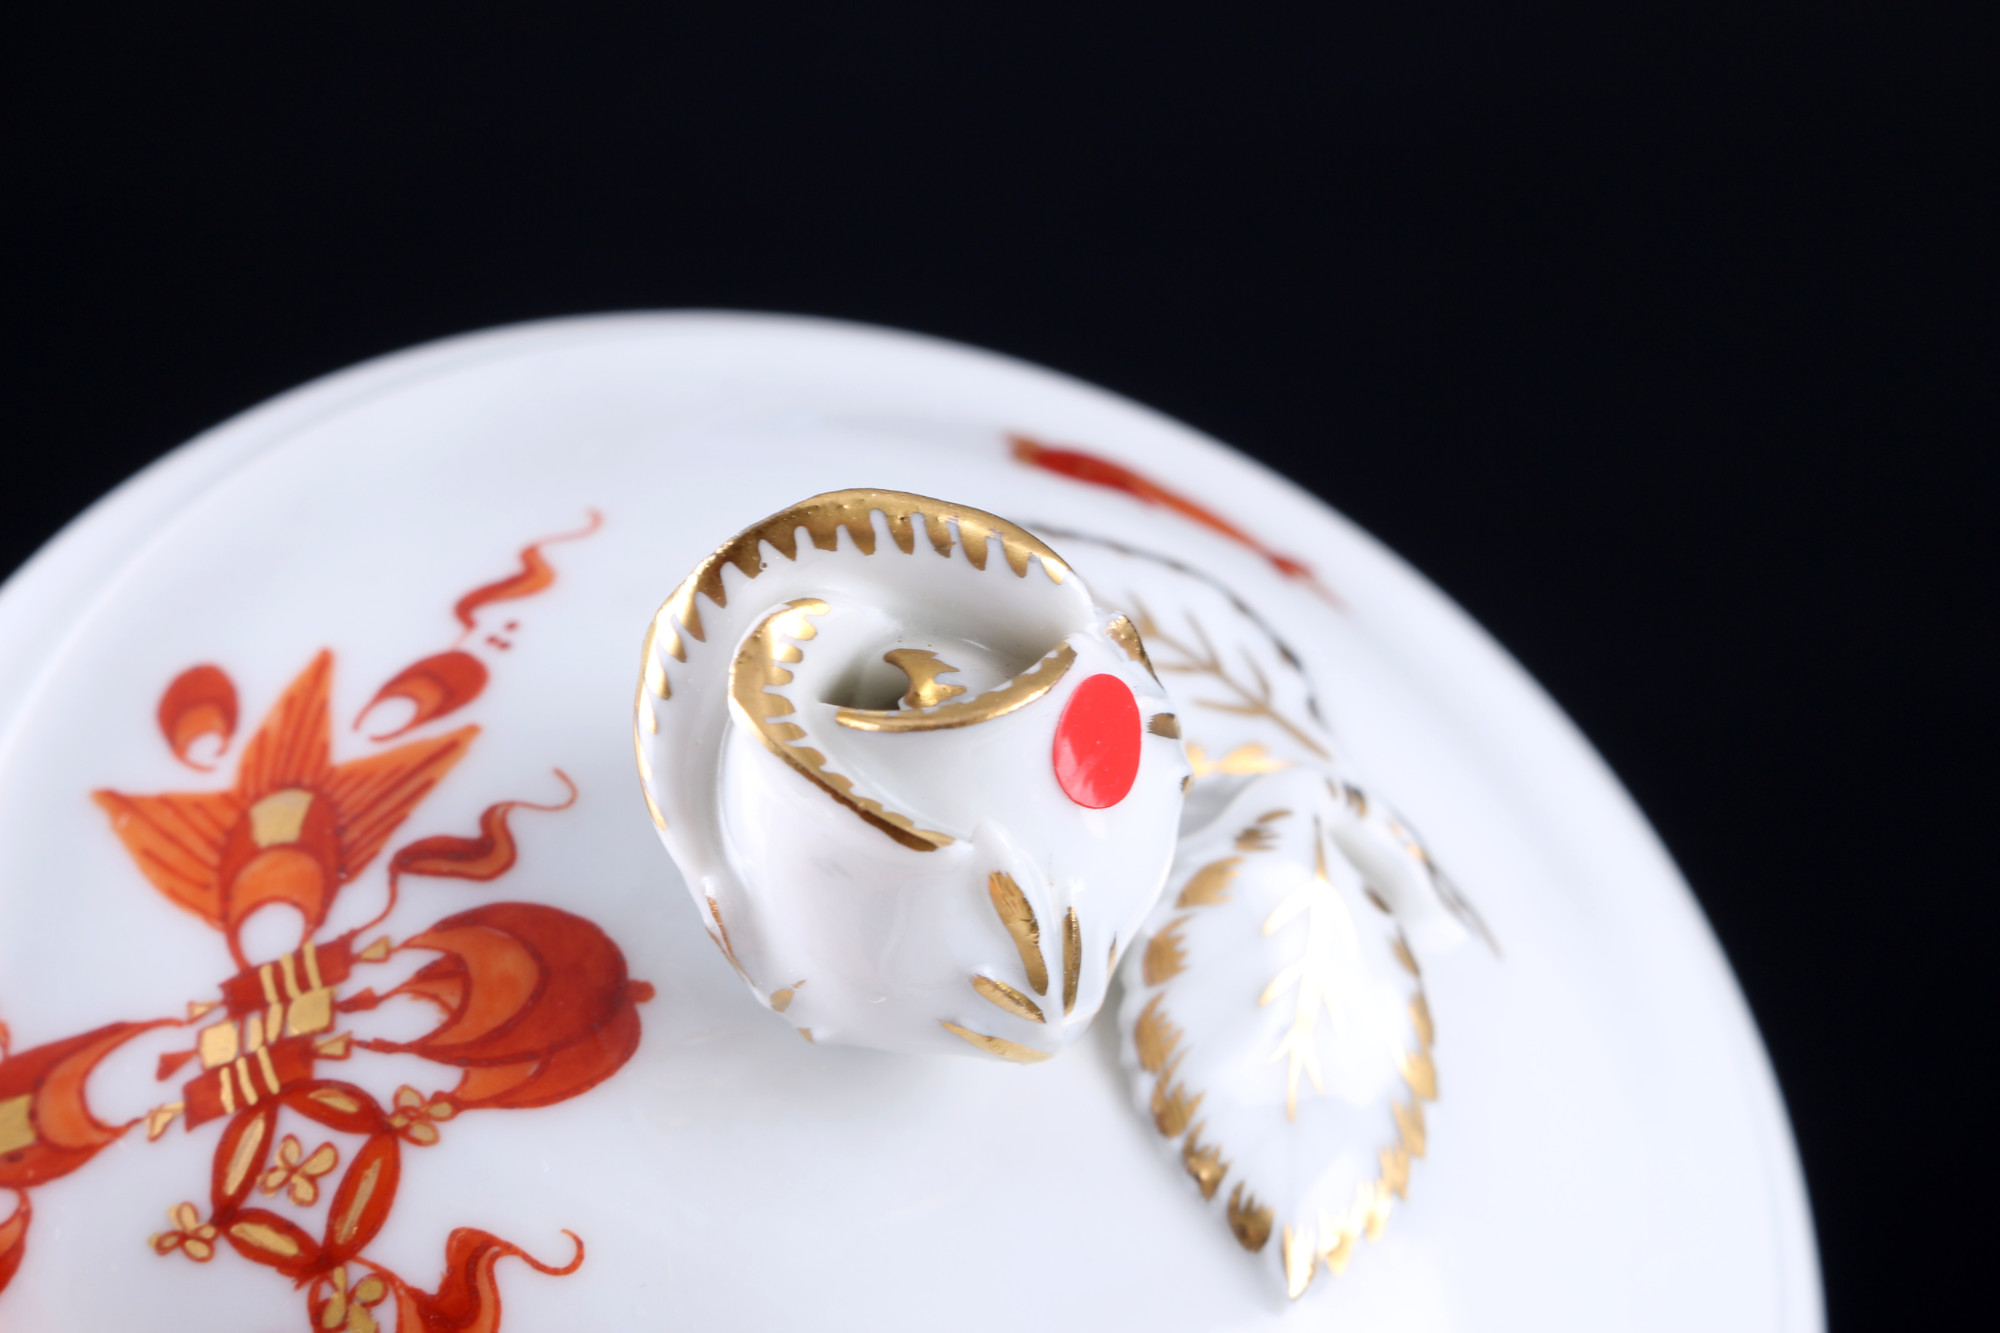 Meissen Red Court Dragon coffee service for 6 persons 1st choice, Kaffeeservice für 6 Personen 1.Wah - Image 9 of 10